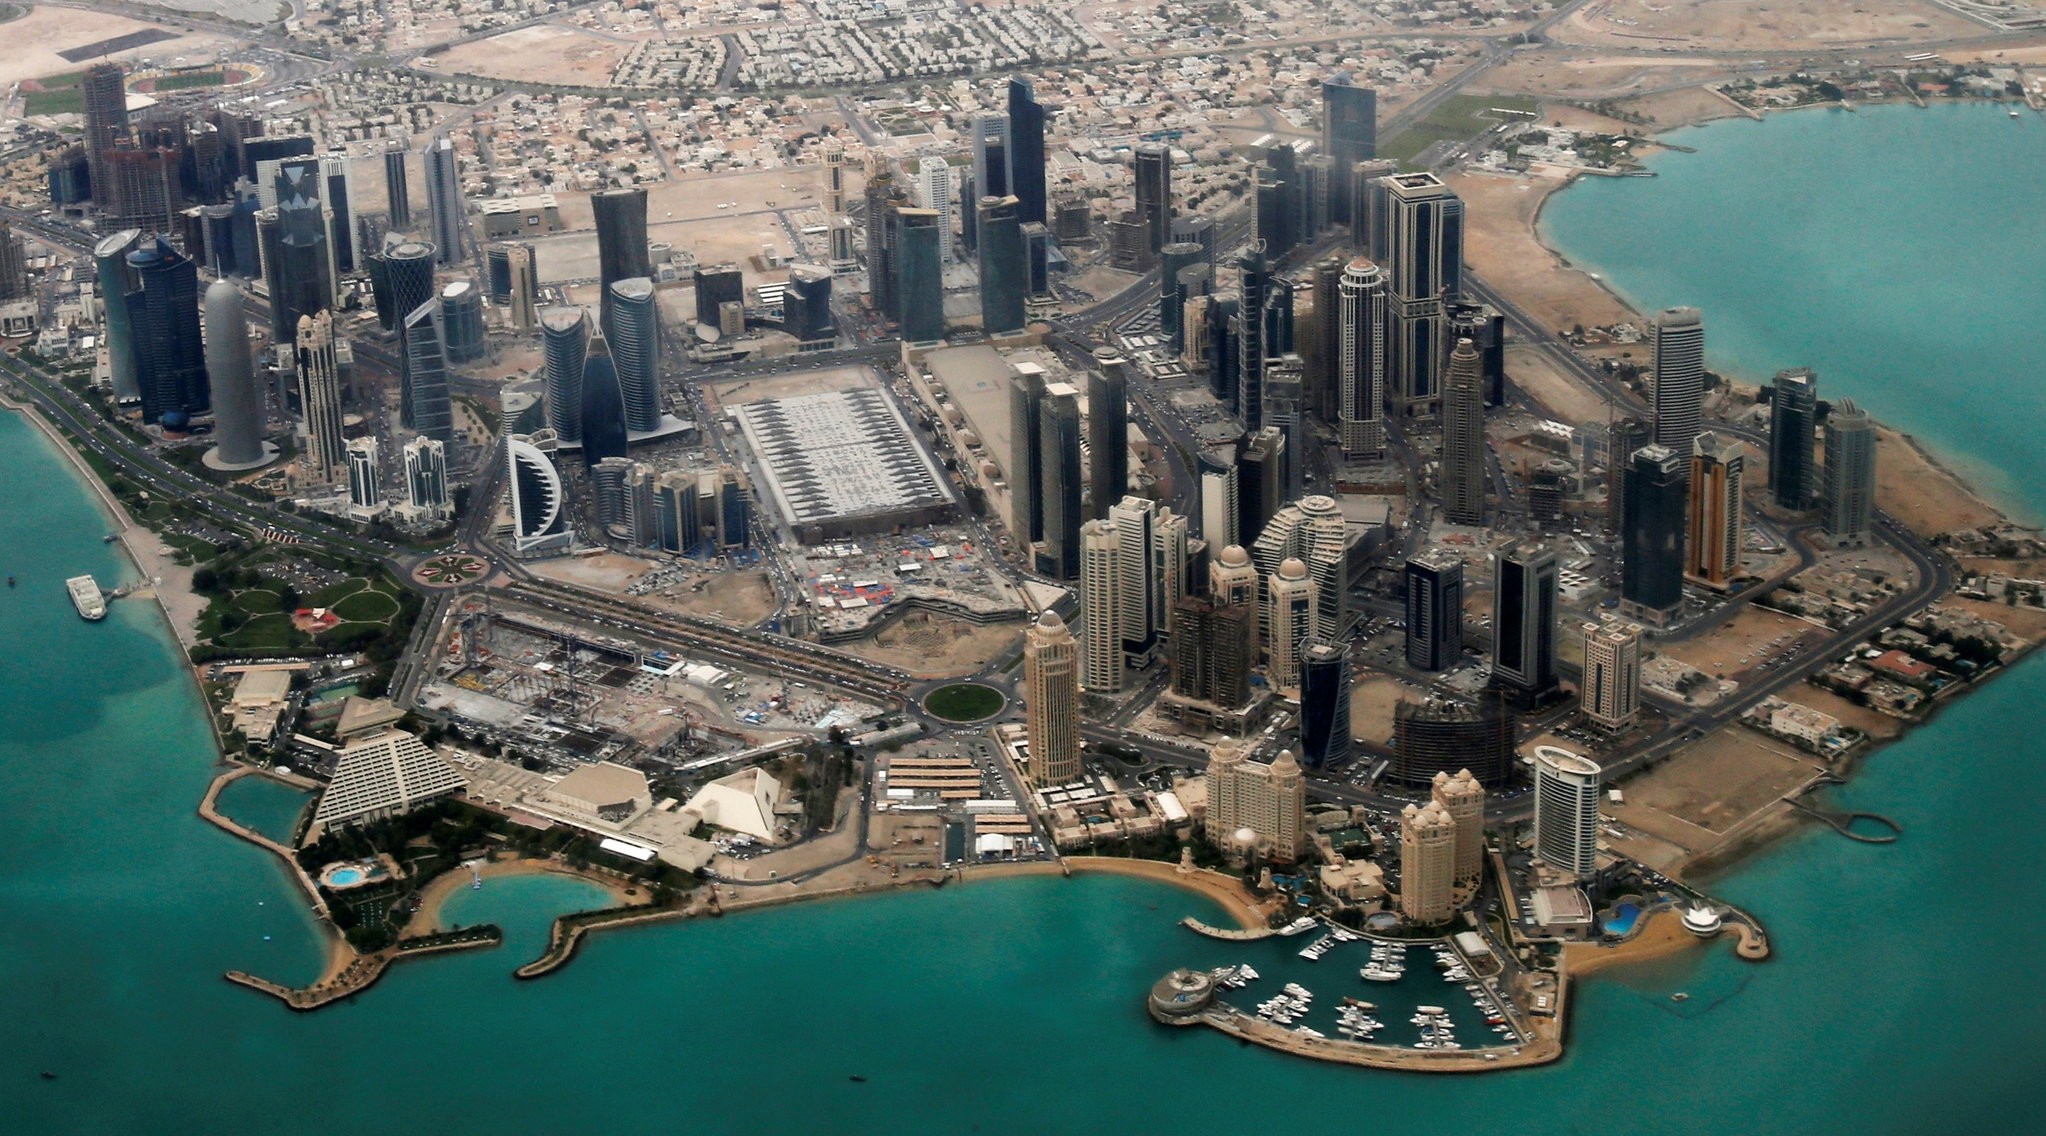 An aerial view of Doha's diplomatic area March 21, 2013. (REUTERS Photo)